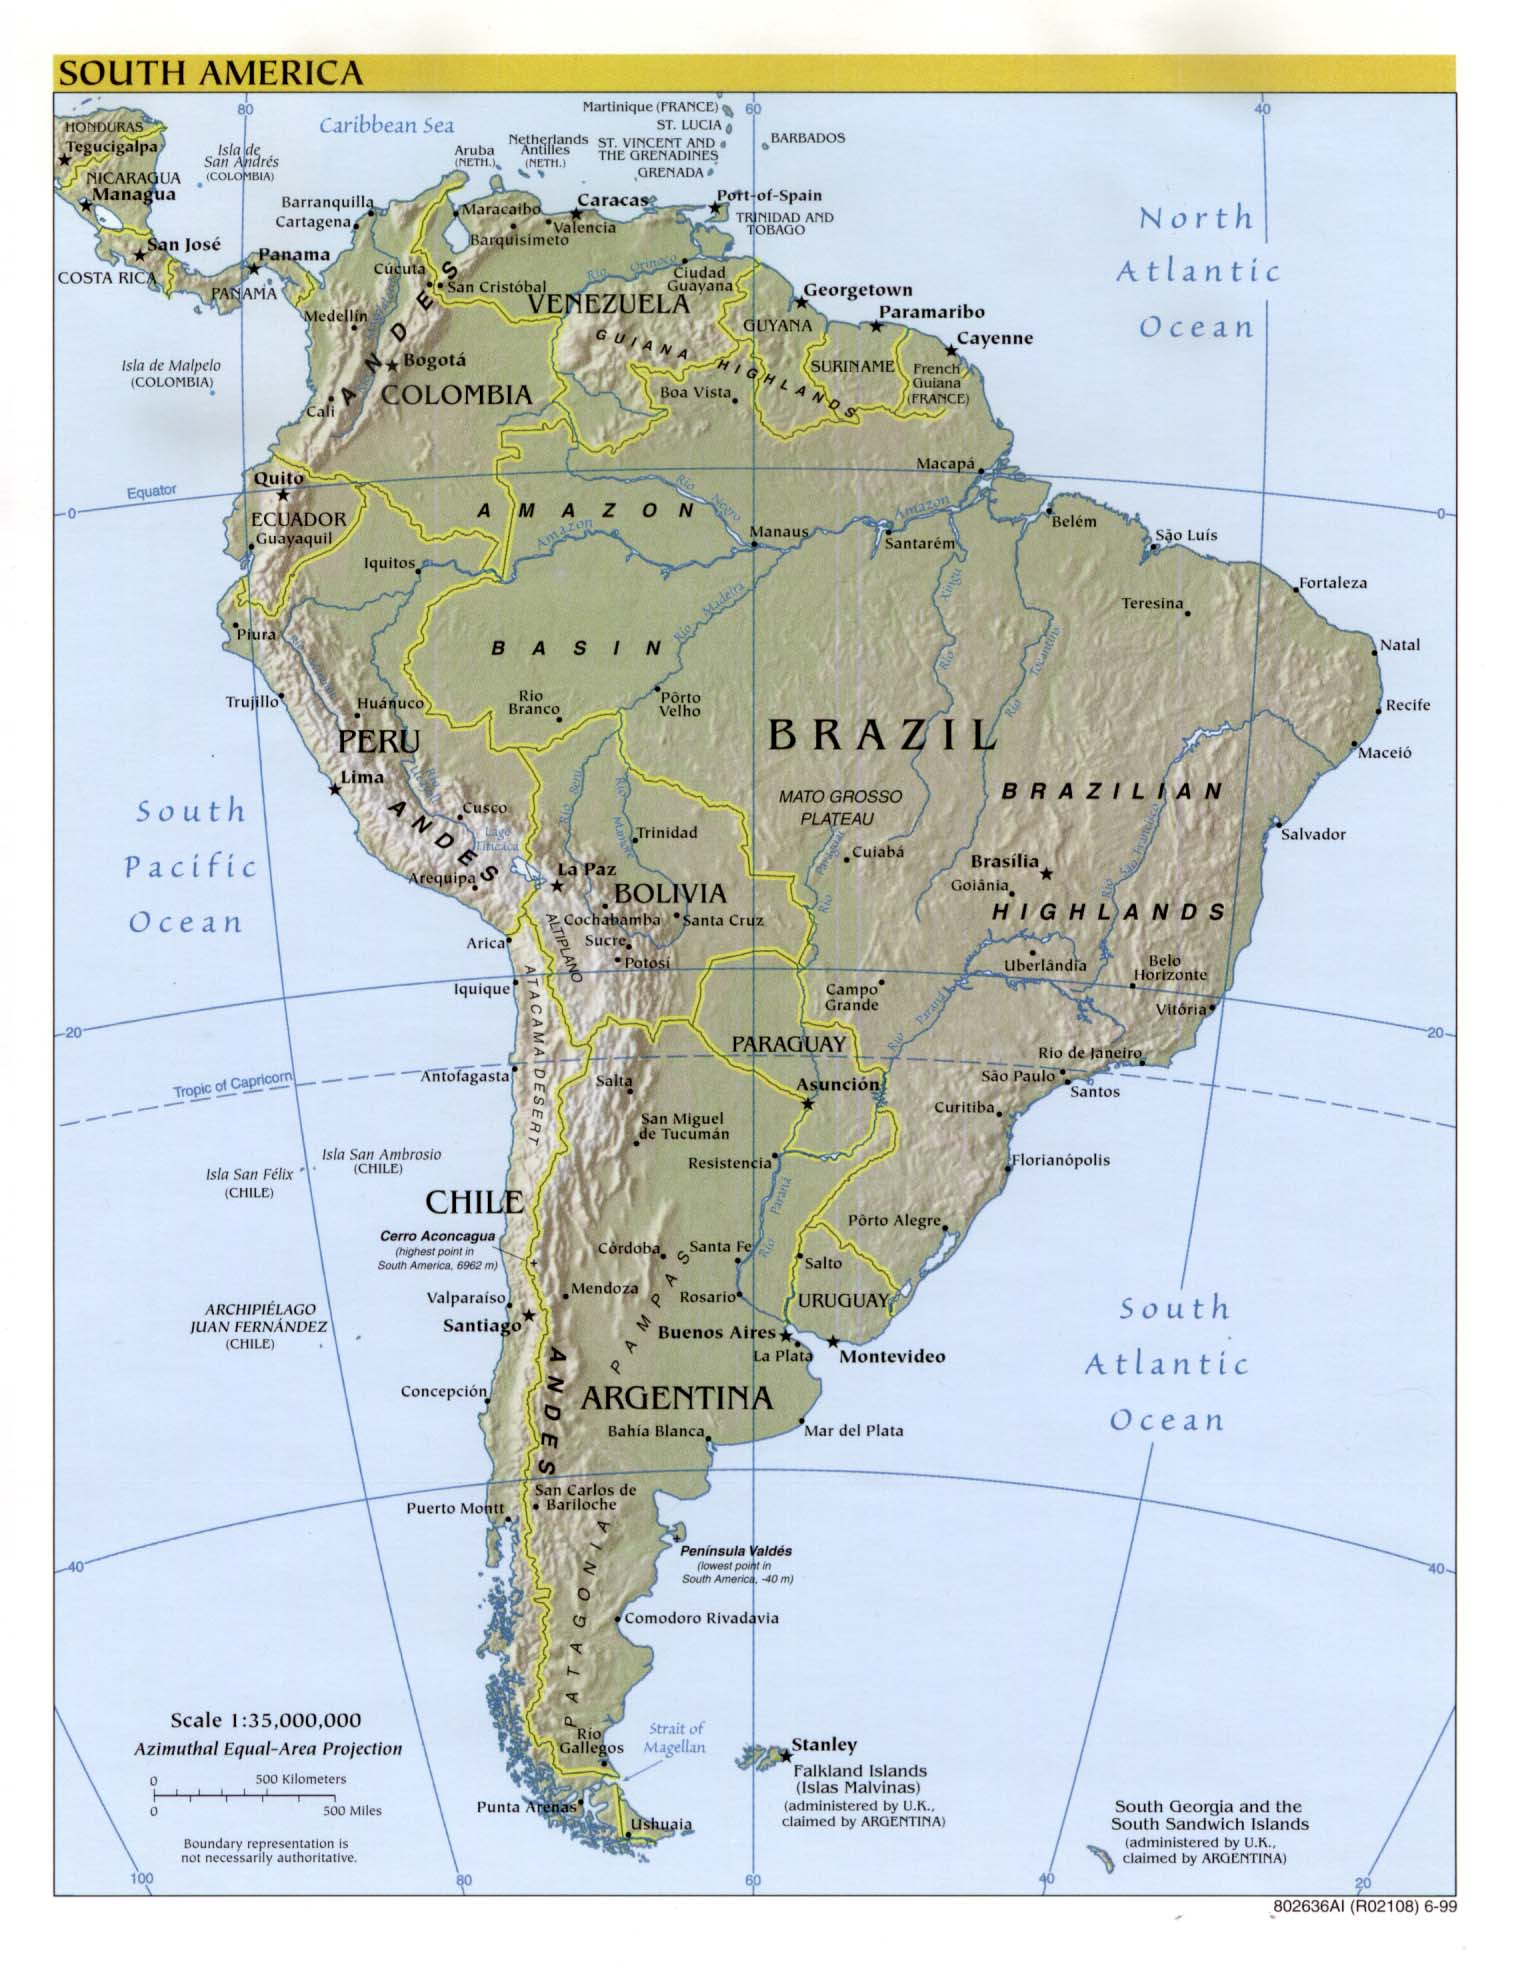 Map Of South America Continent. South America (Reference Map) 1999 Larger JPEG Image (267K)